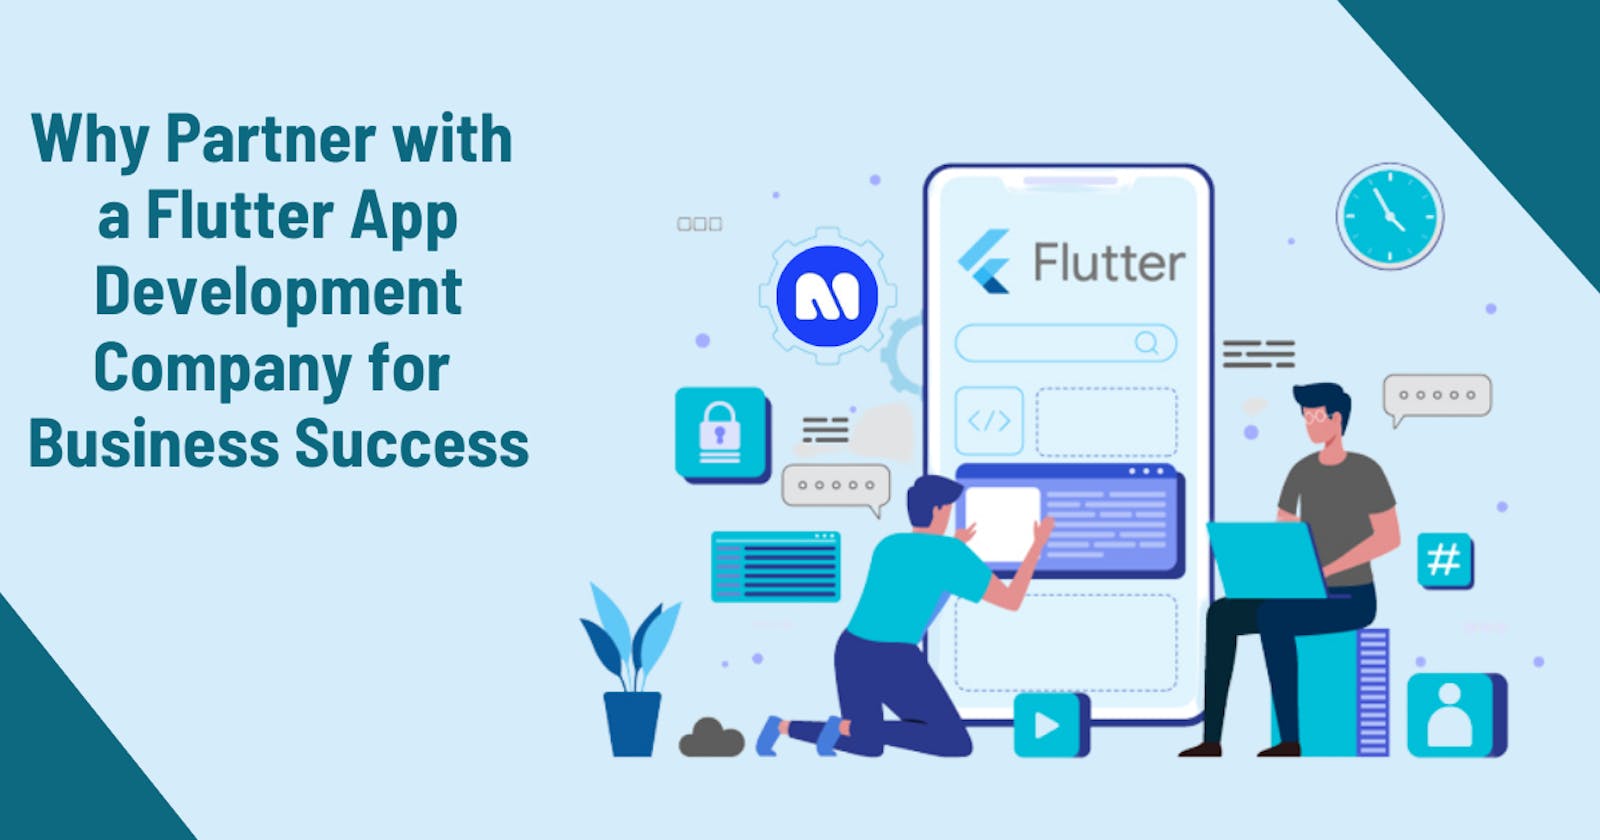 Why Partner with a Flutter App Development Company for Business Success?